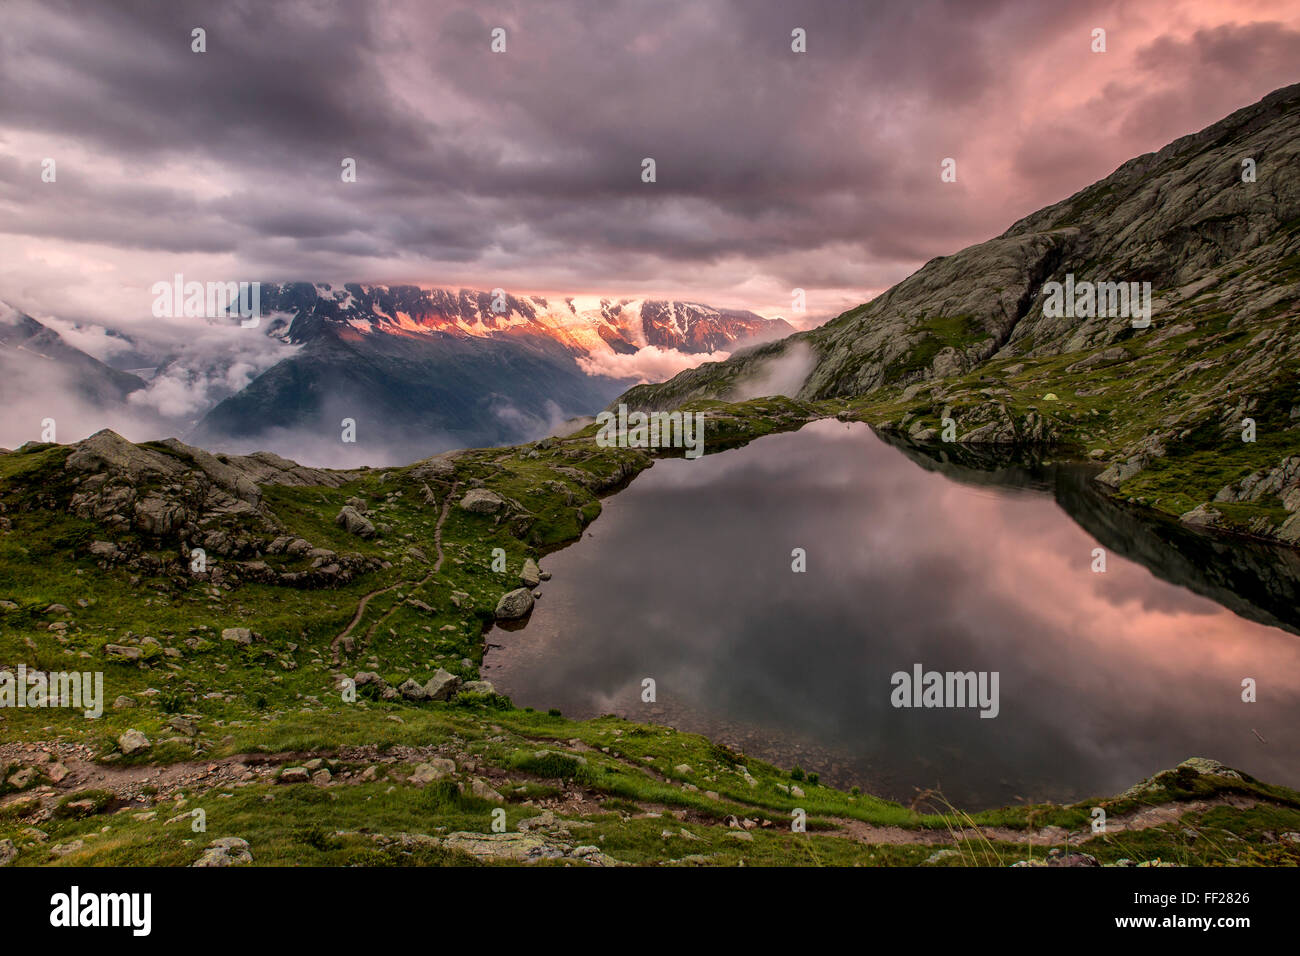 Clouds are tinged with purple at sunset at Lac de Cheserys, Chamonix, Haute Savoie, French Alps, France, Europe Stock Photo